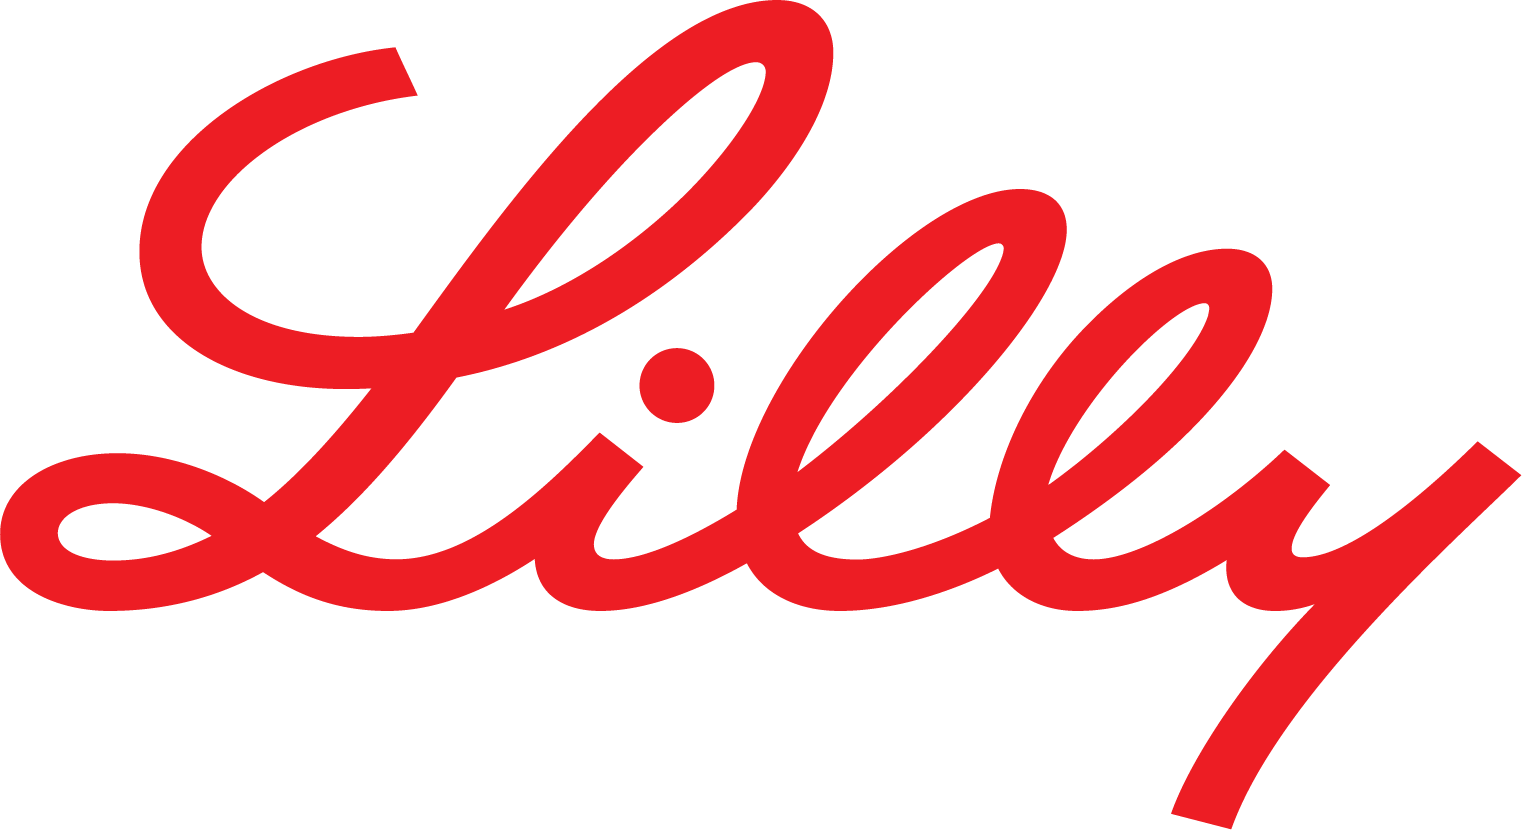 Lilly, Eli Lilly and Company